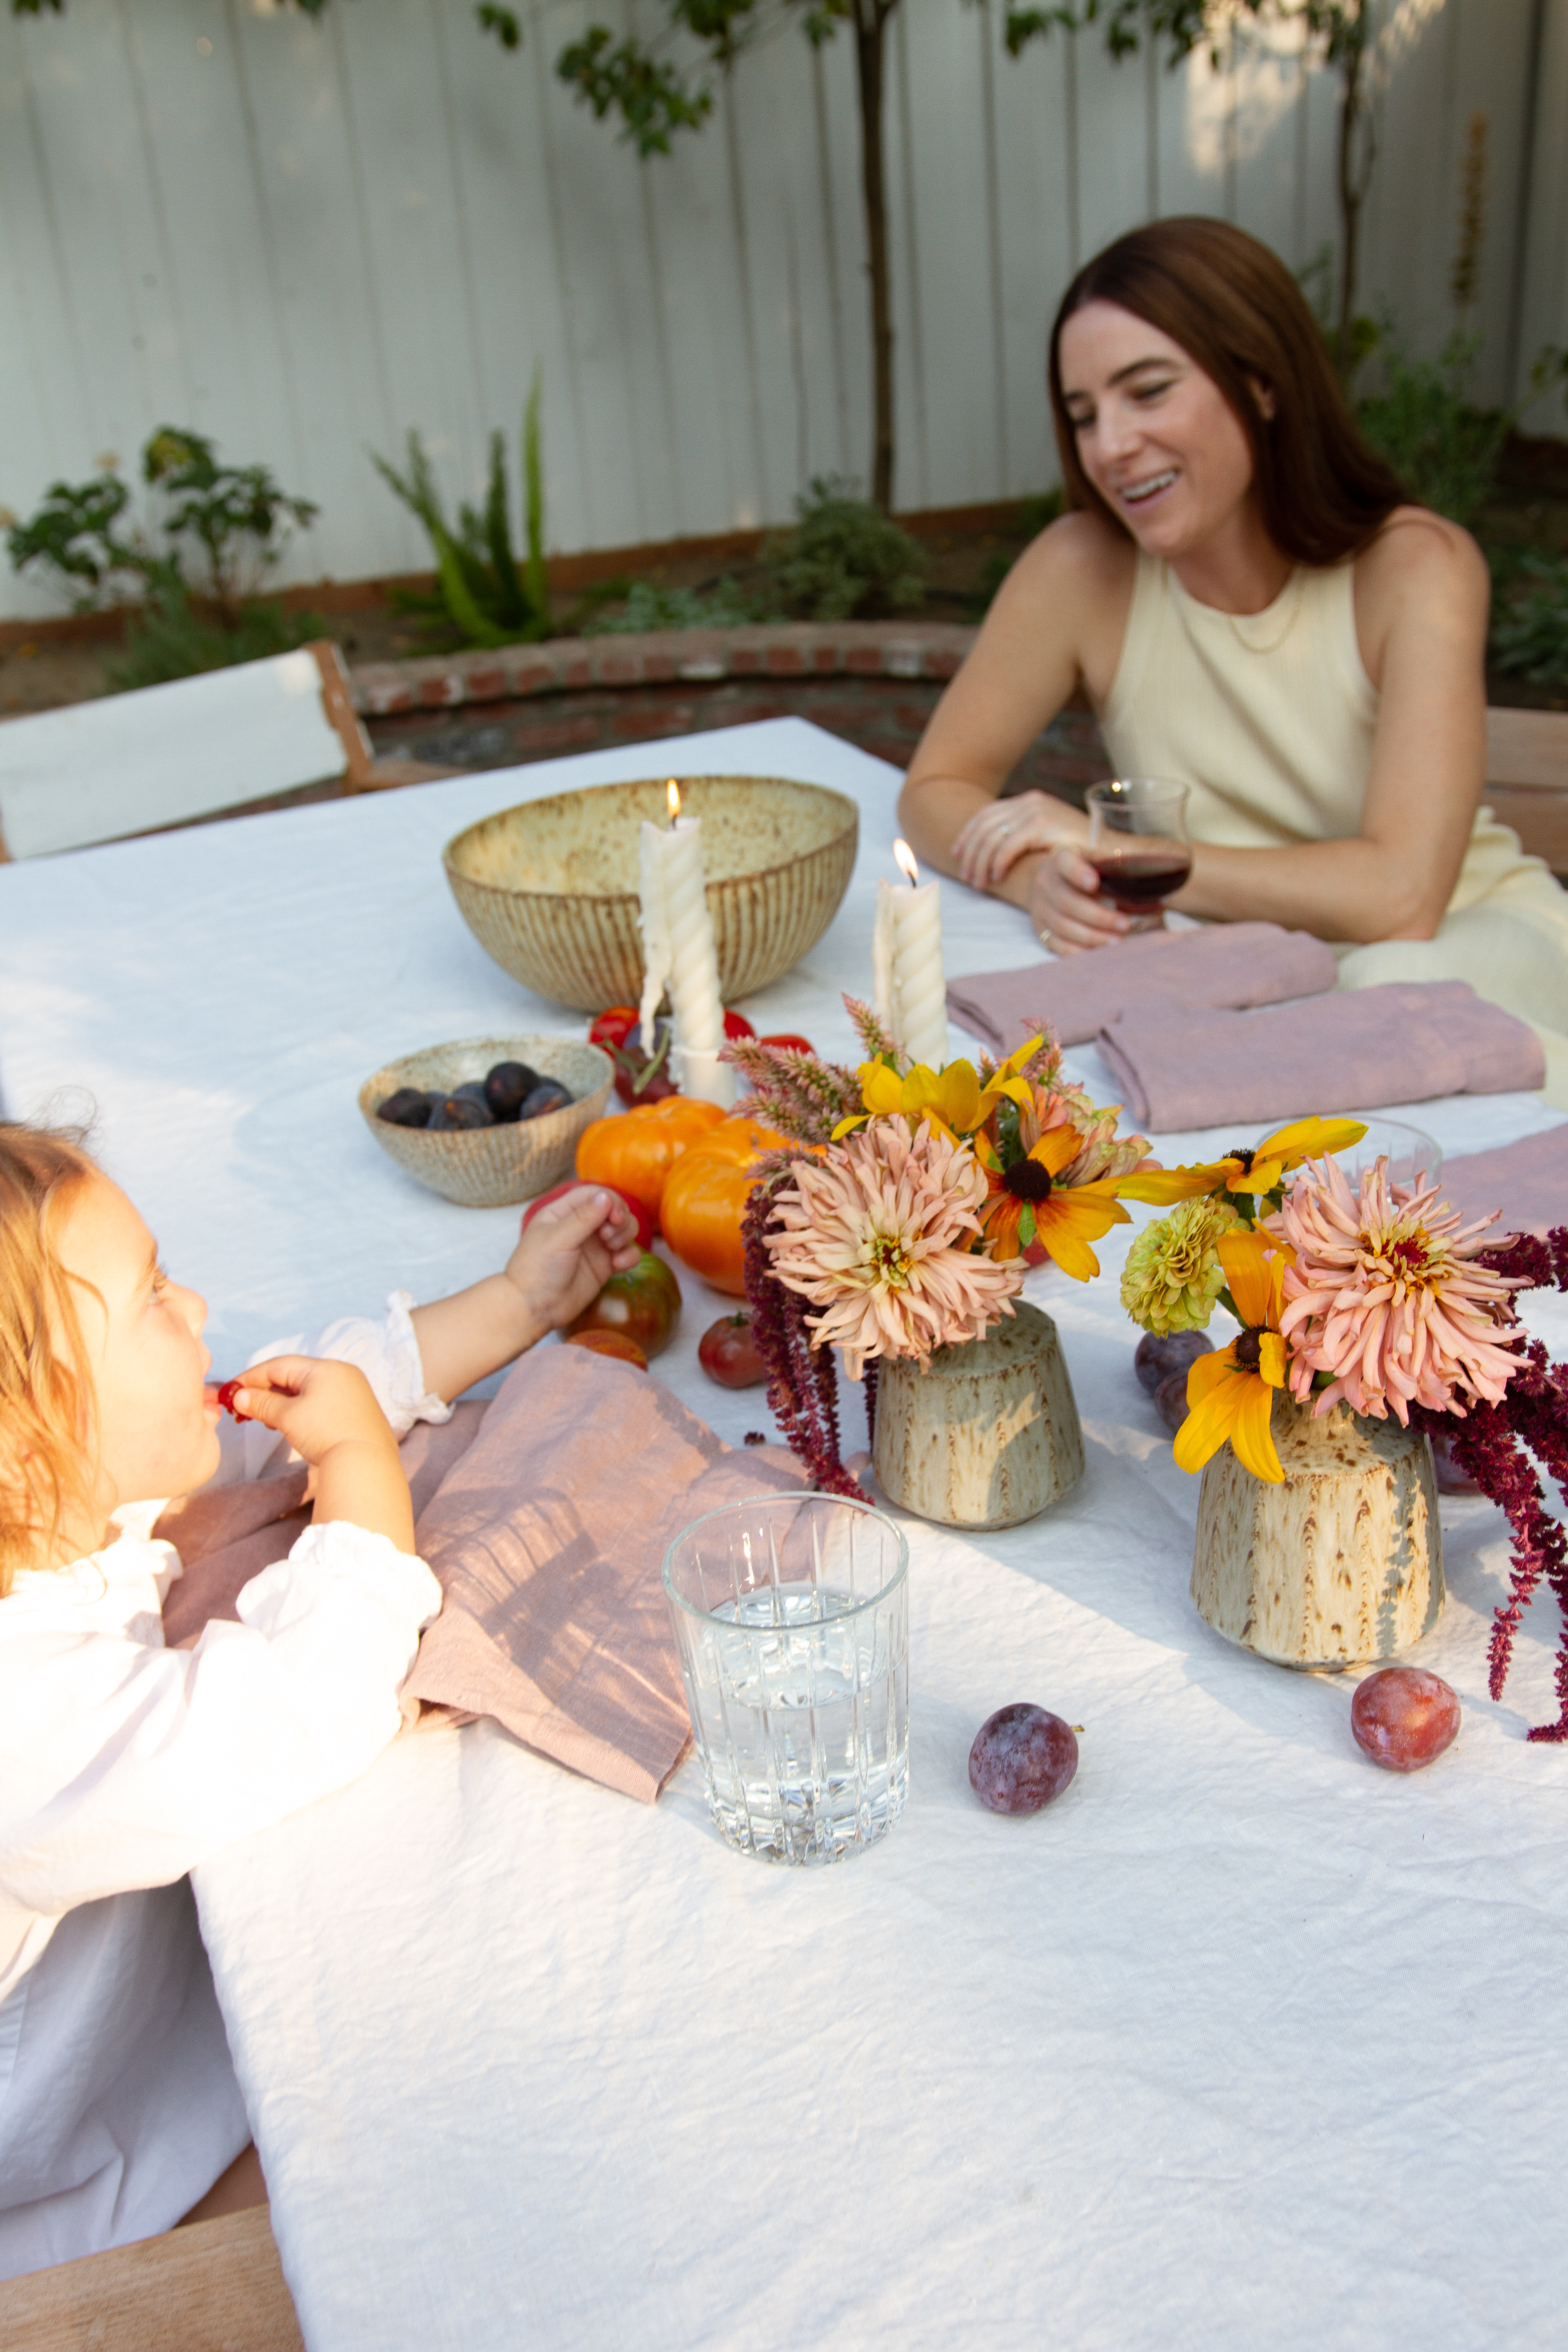 Talking with Willow at a candlelit dinner table set with Wrel Living linens and Zoe Dering bud vases.